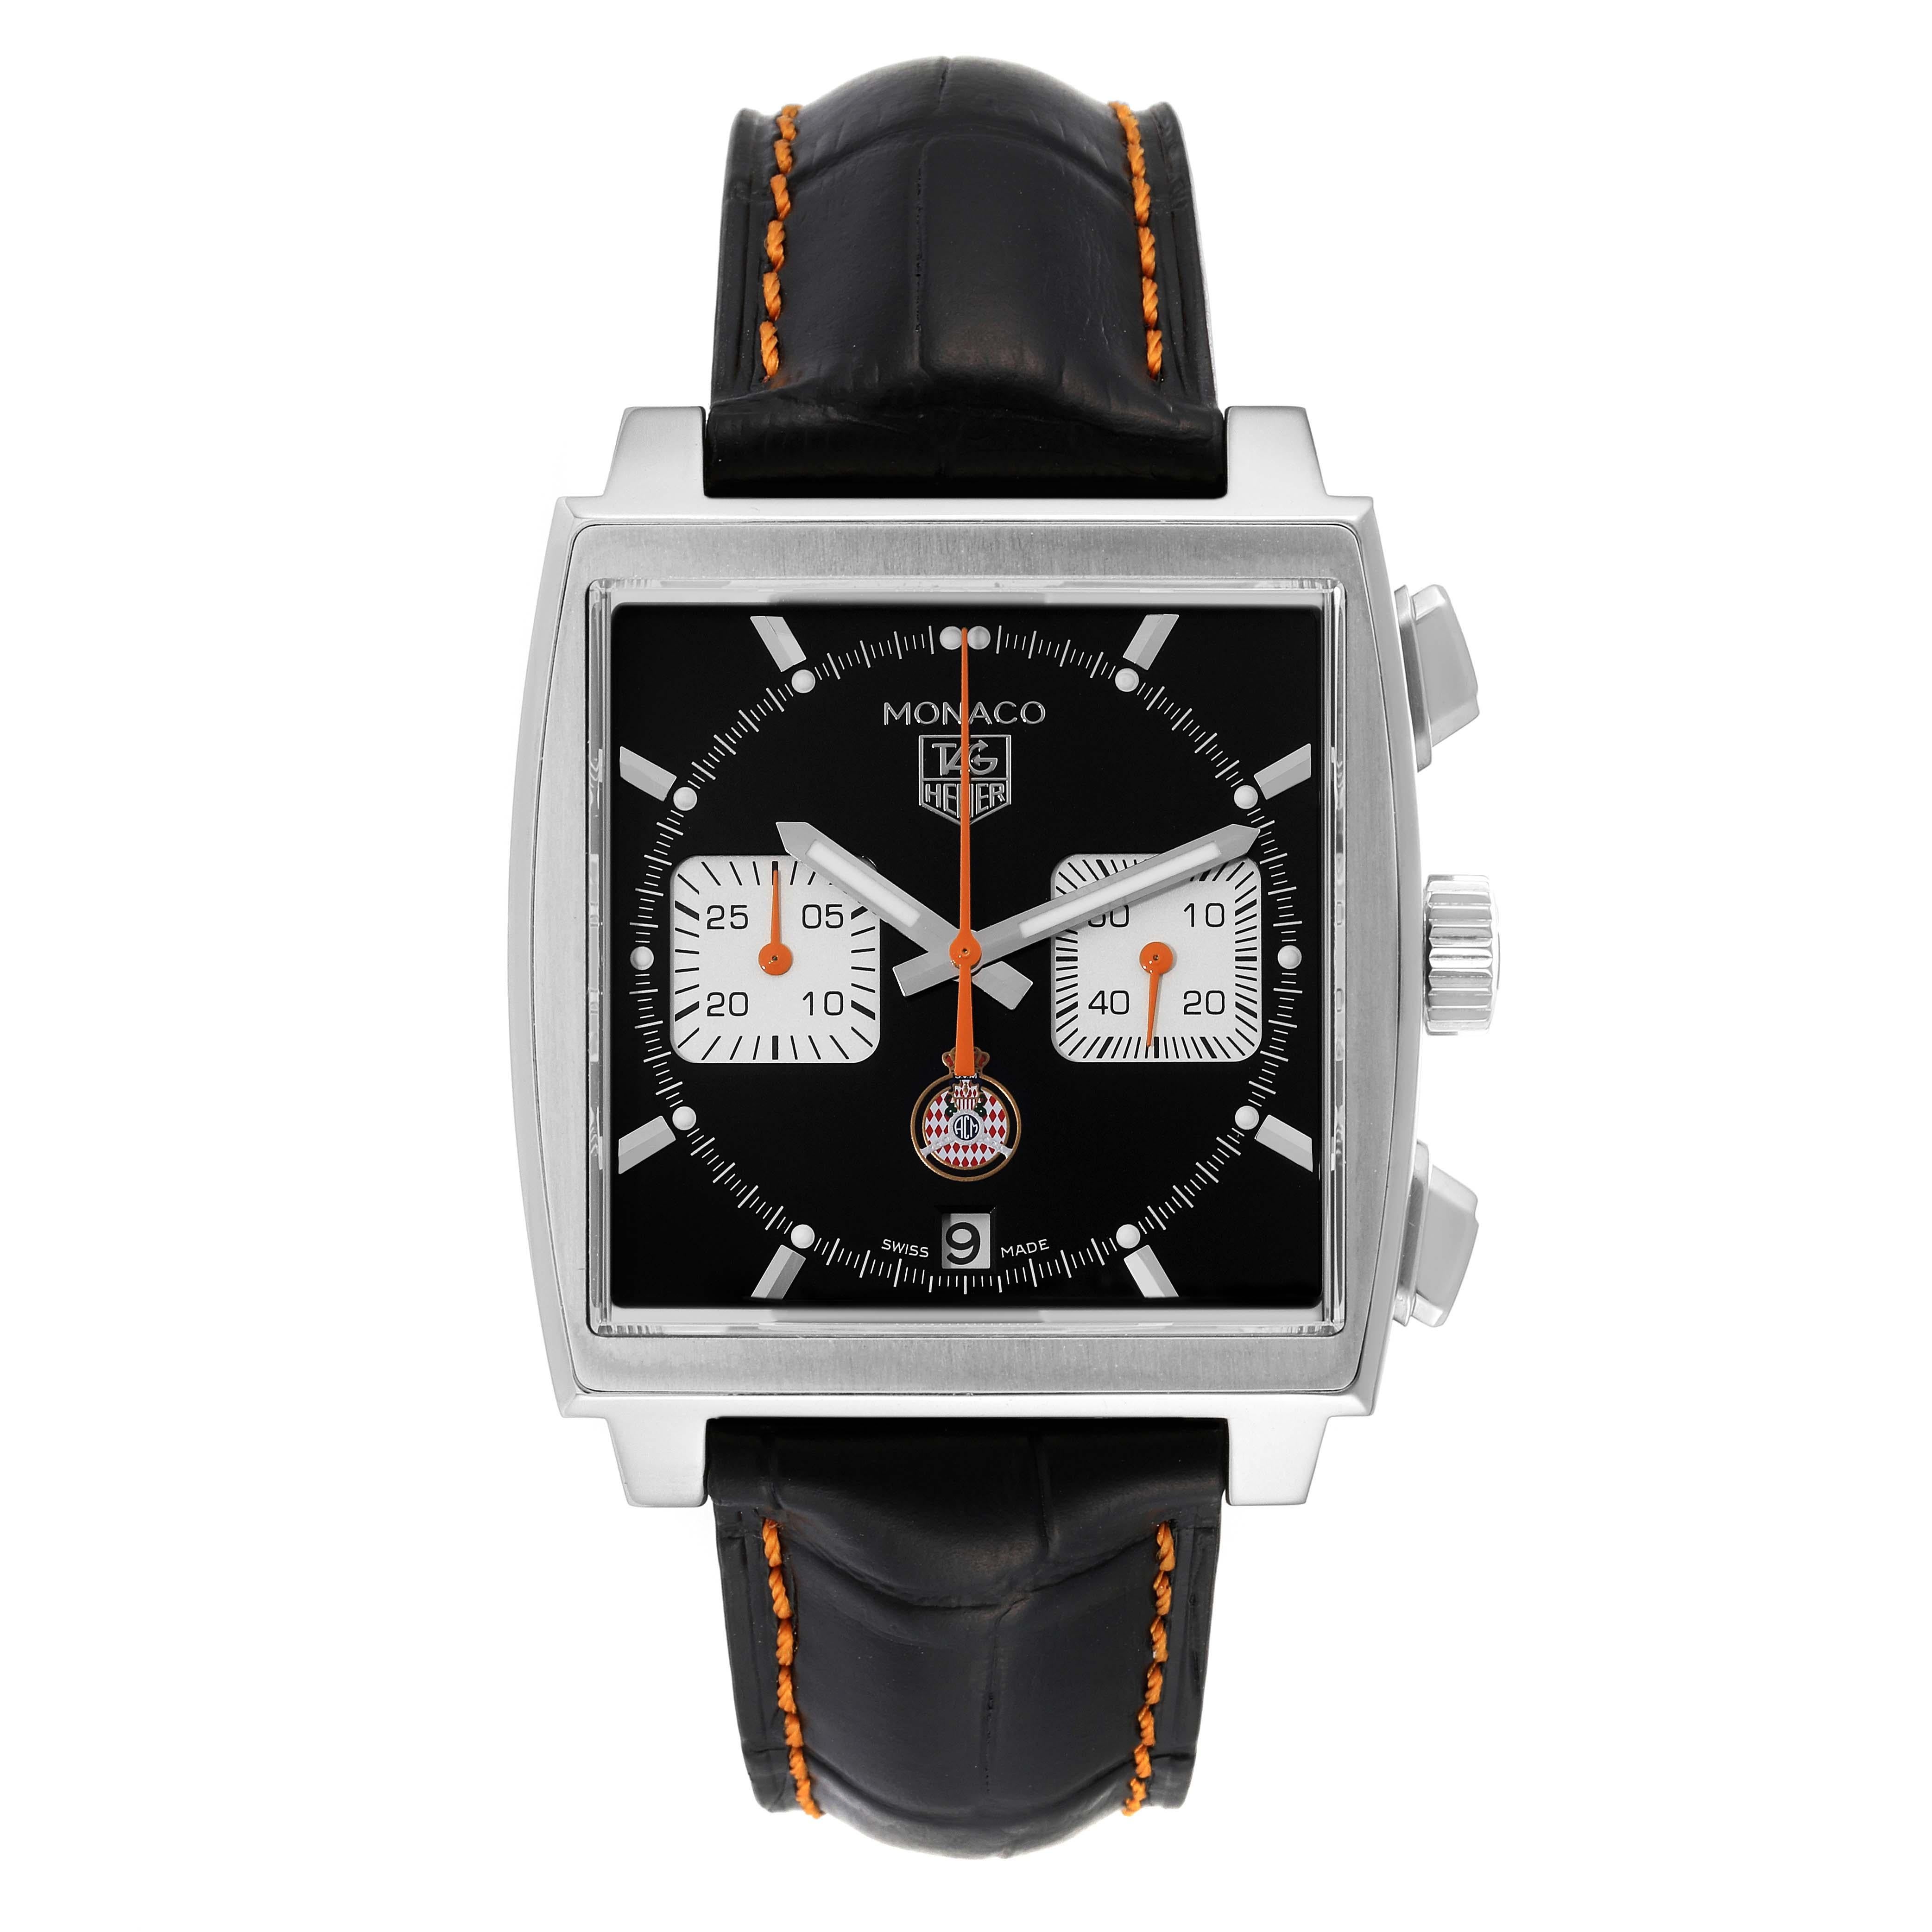 Tag Heuer Monaco Calibre 12 ACM Limited Edition Watch CAW211K Box Card. Automatic self-winding movement. Alternate fine-brushed and polished stainless steel case 39.0 x 39.0 mm. Fluted crown. Exhibition caseback. Stainless steel bezel. Scratch